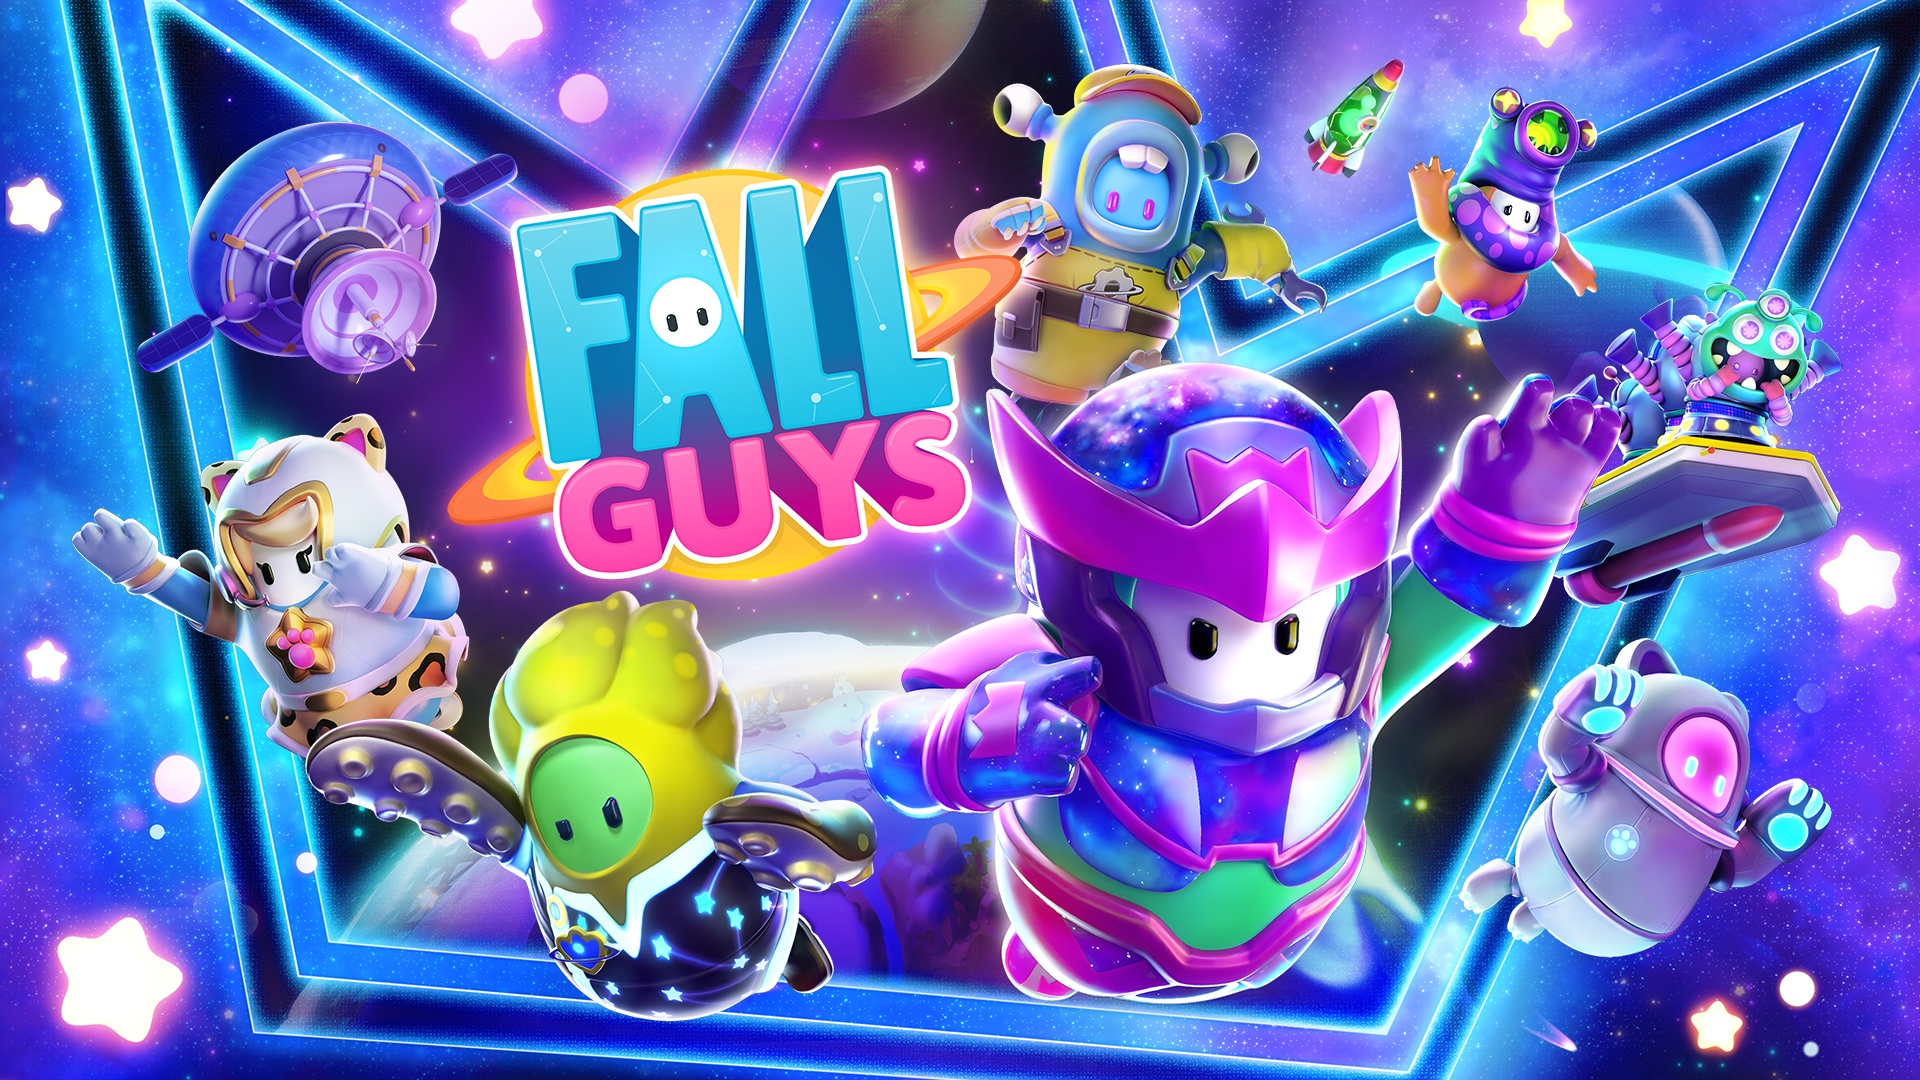 Fall Guys Gift Grab Event - Play Now!